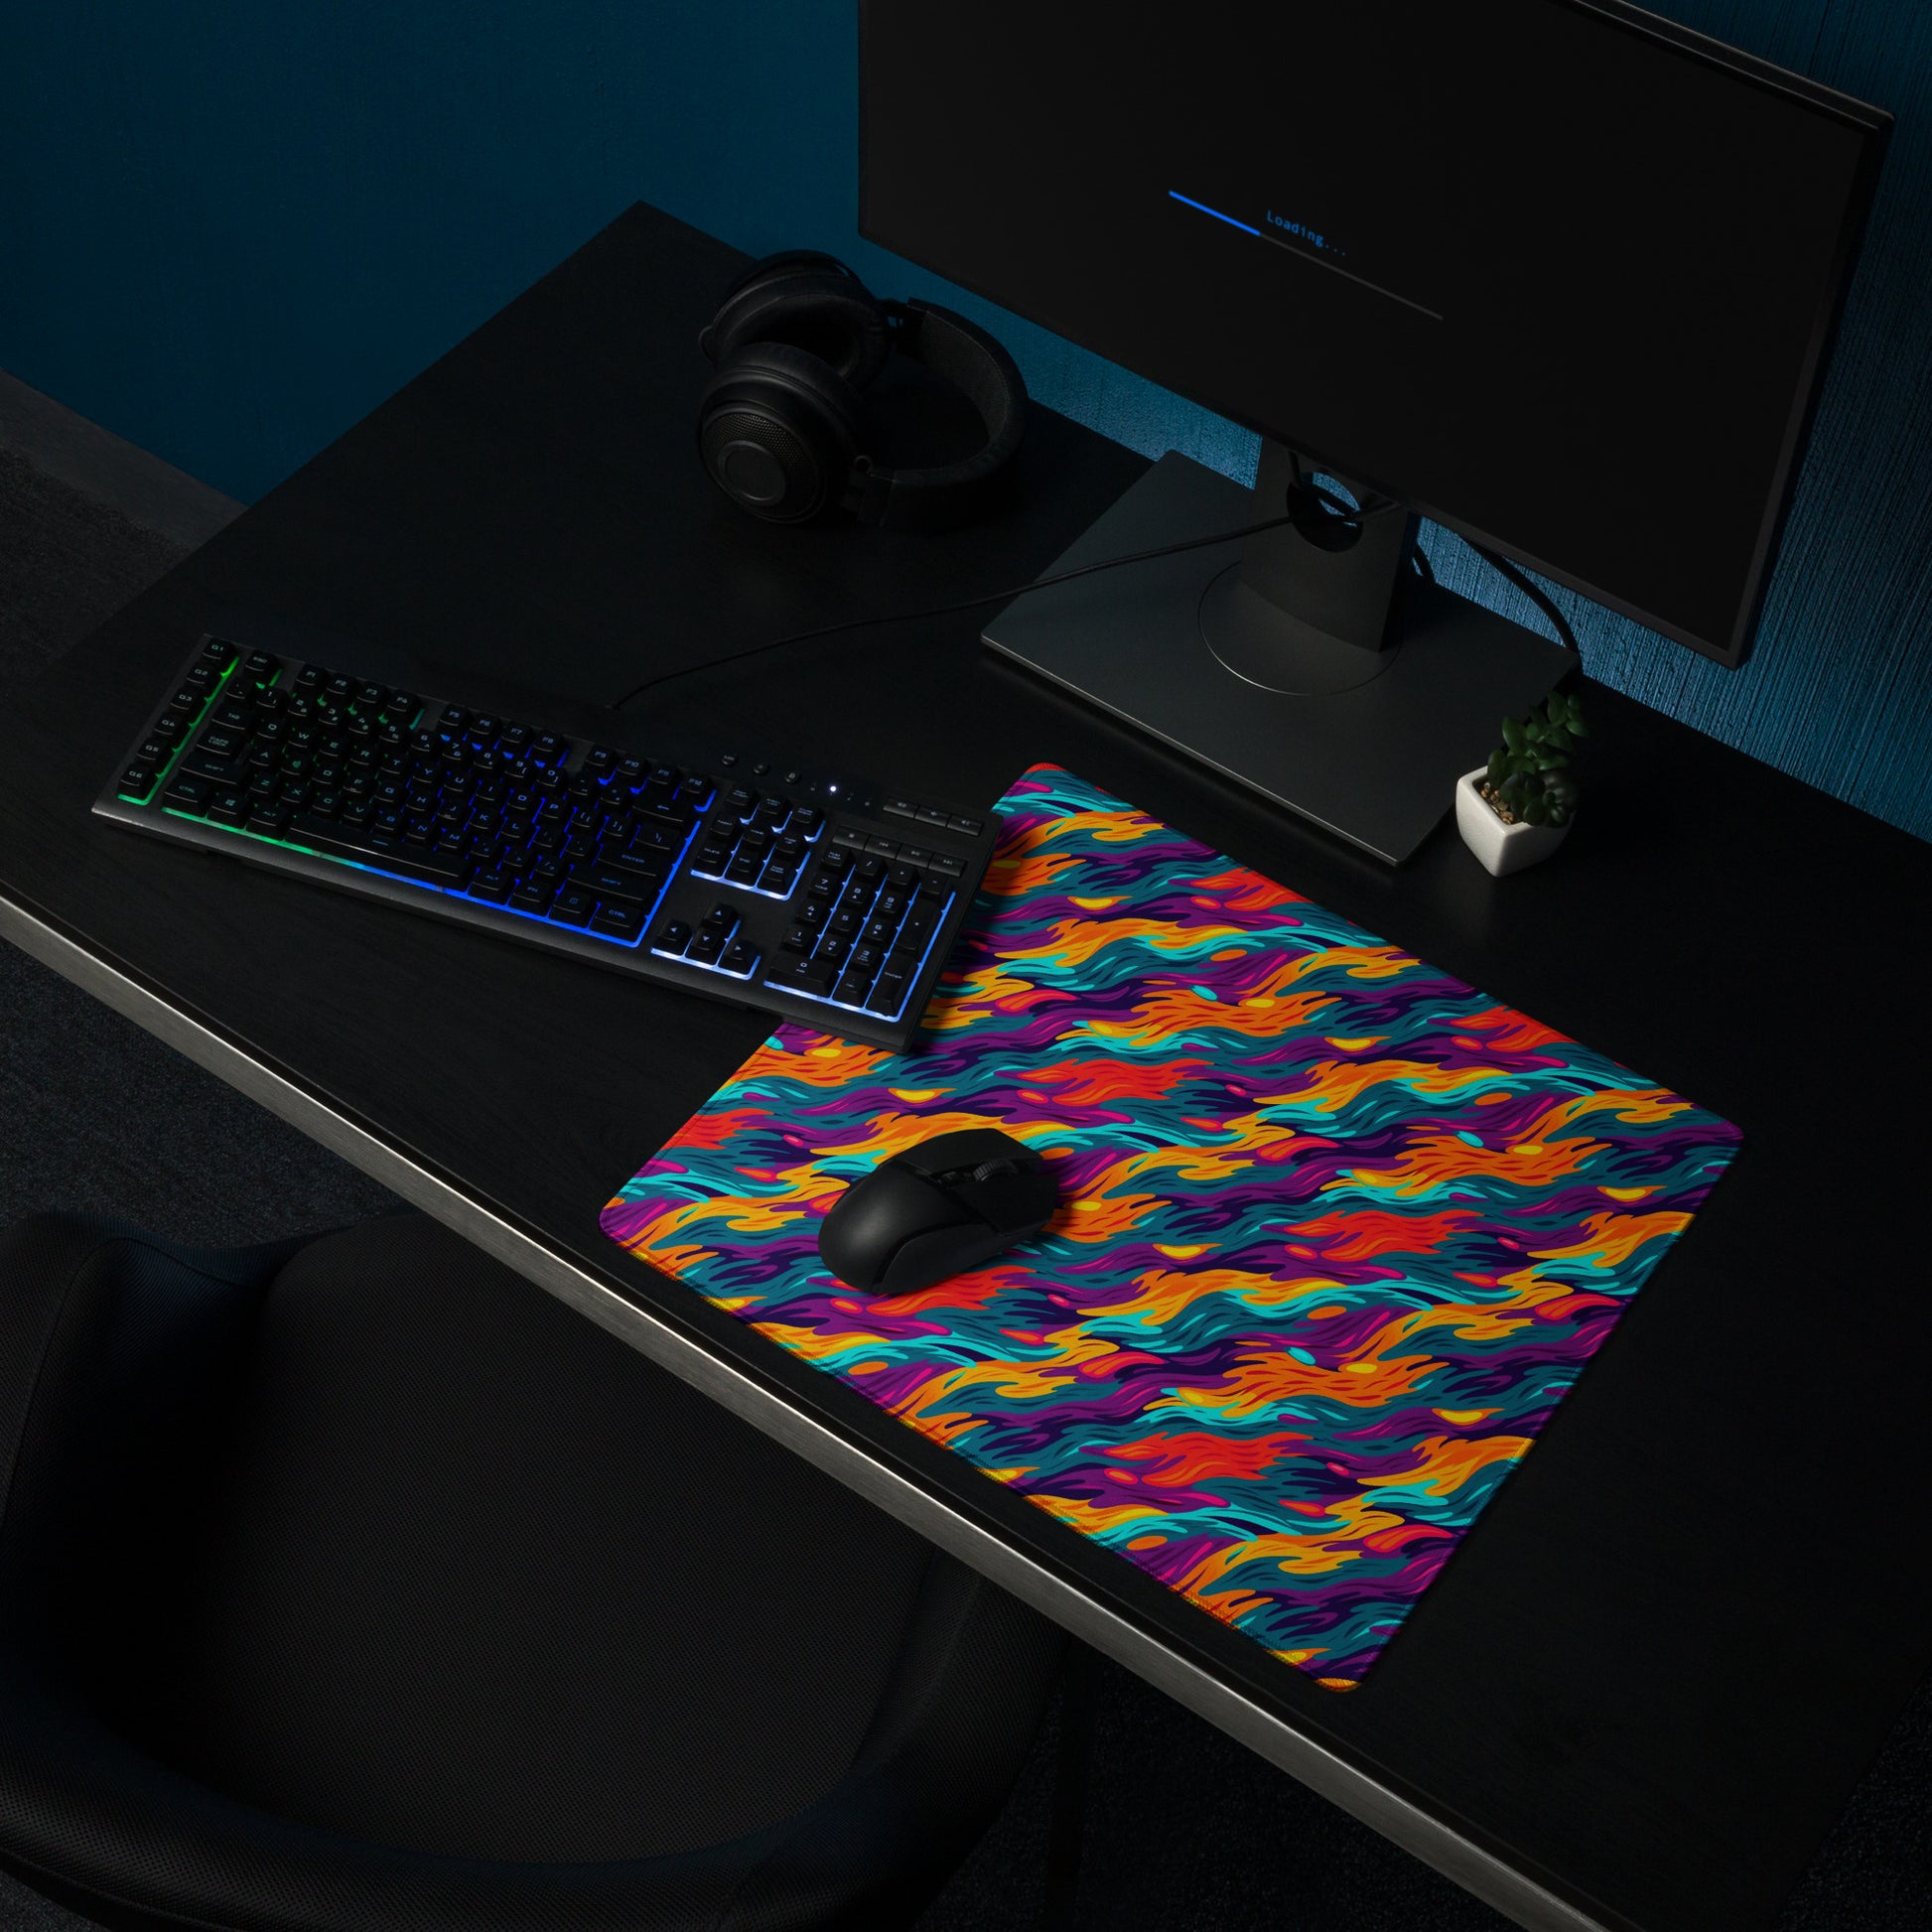 An 18" x 16" desk pad with a wavy flame pattern on it shown on a desk setup. Rainbow in color.